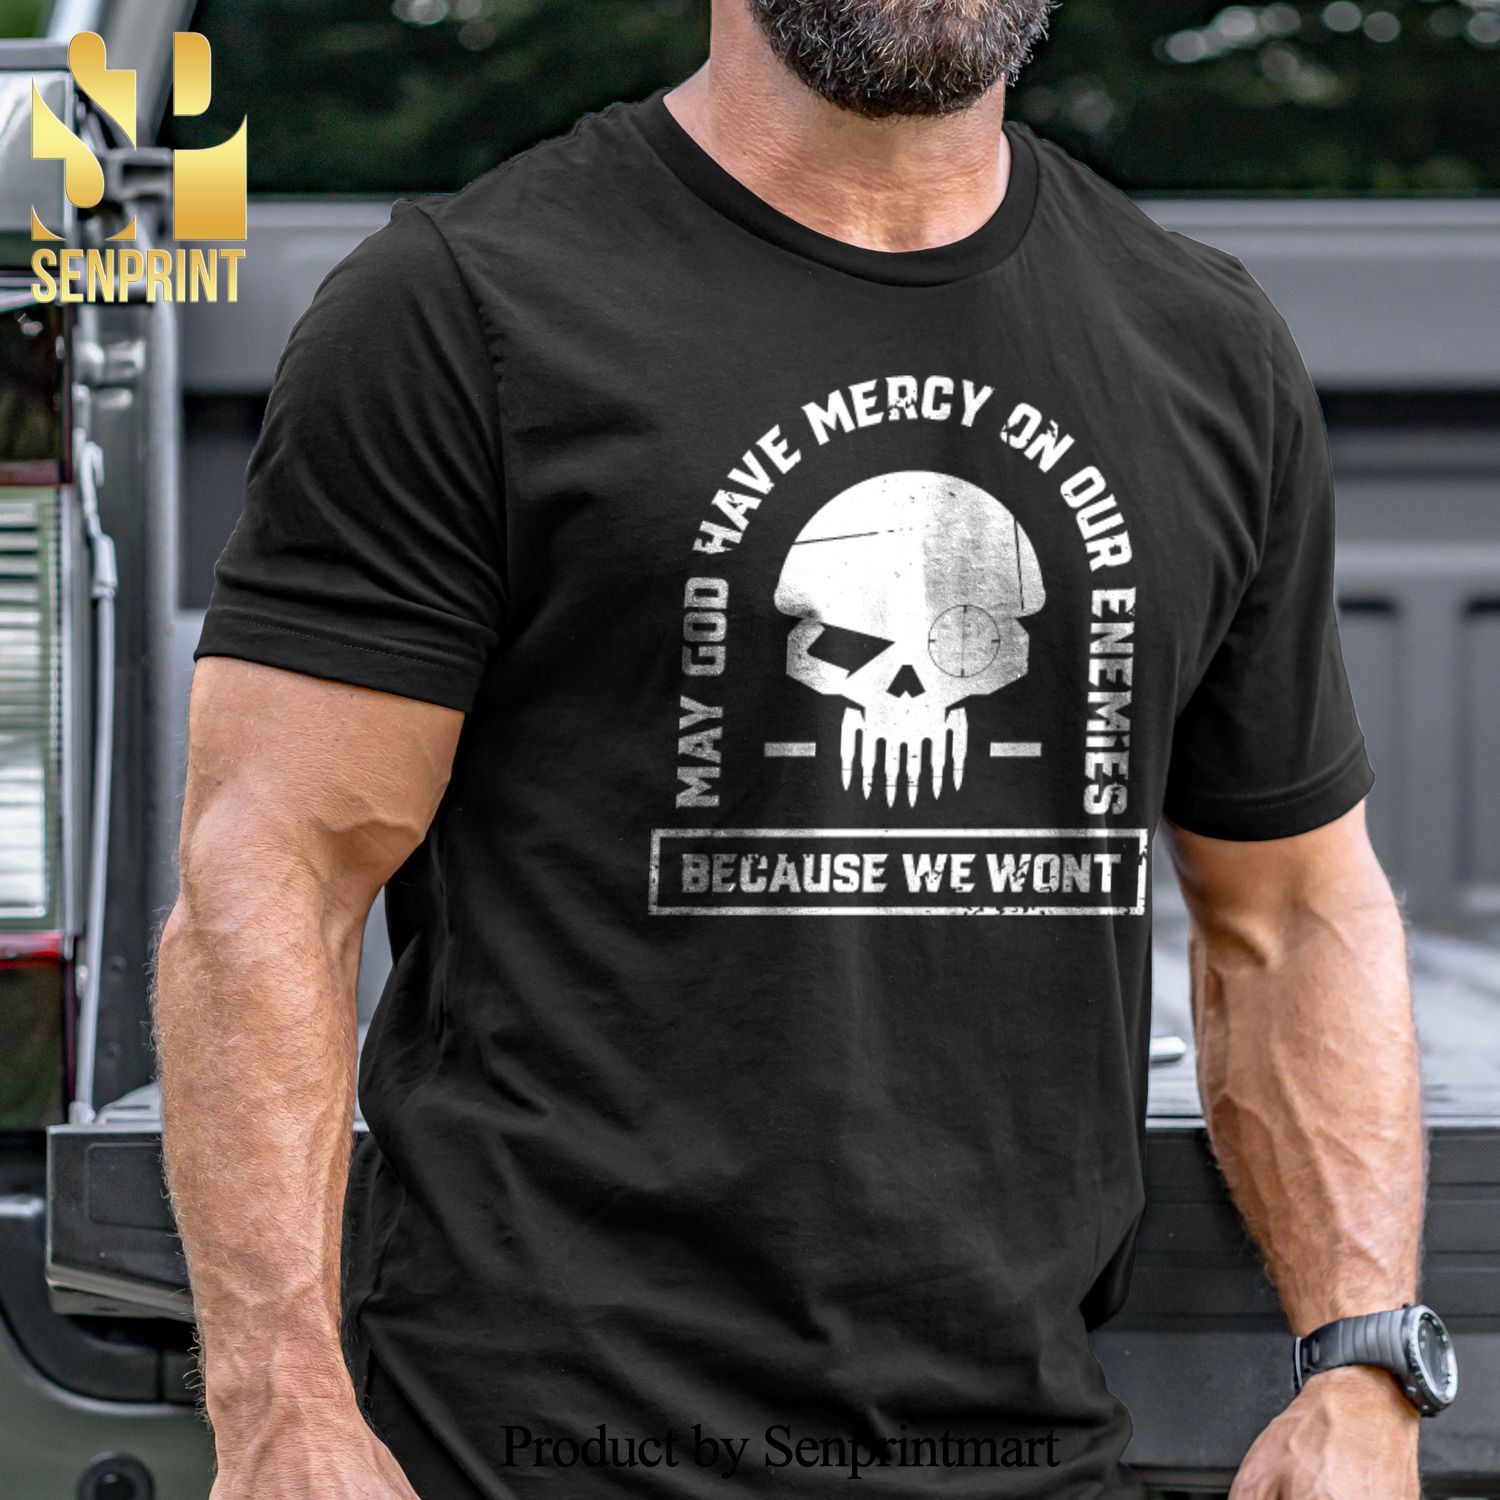 Mercy on our Enemies Military Unisex Shirt